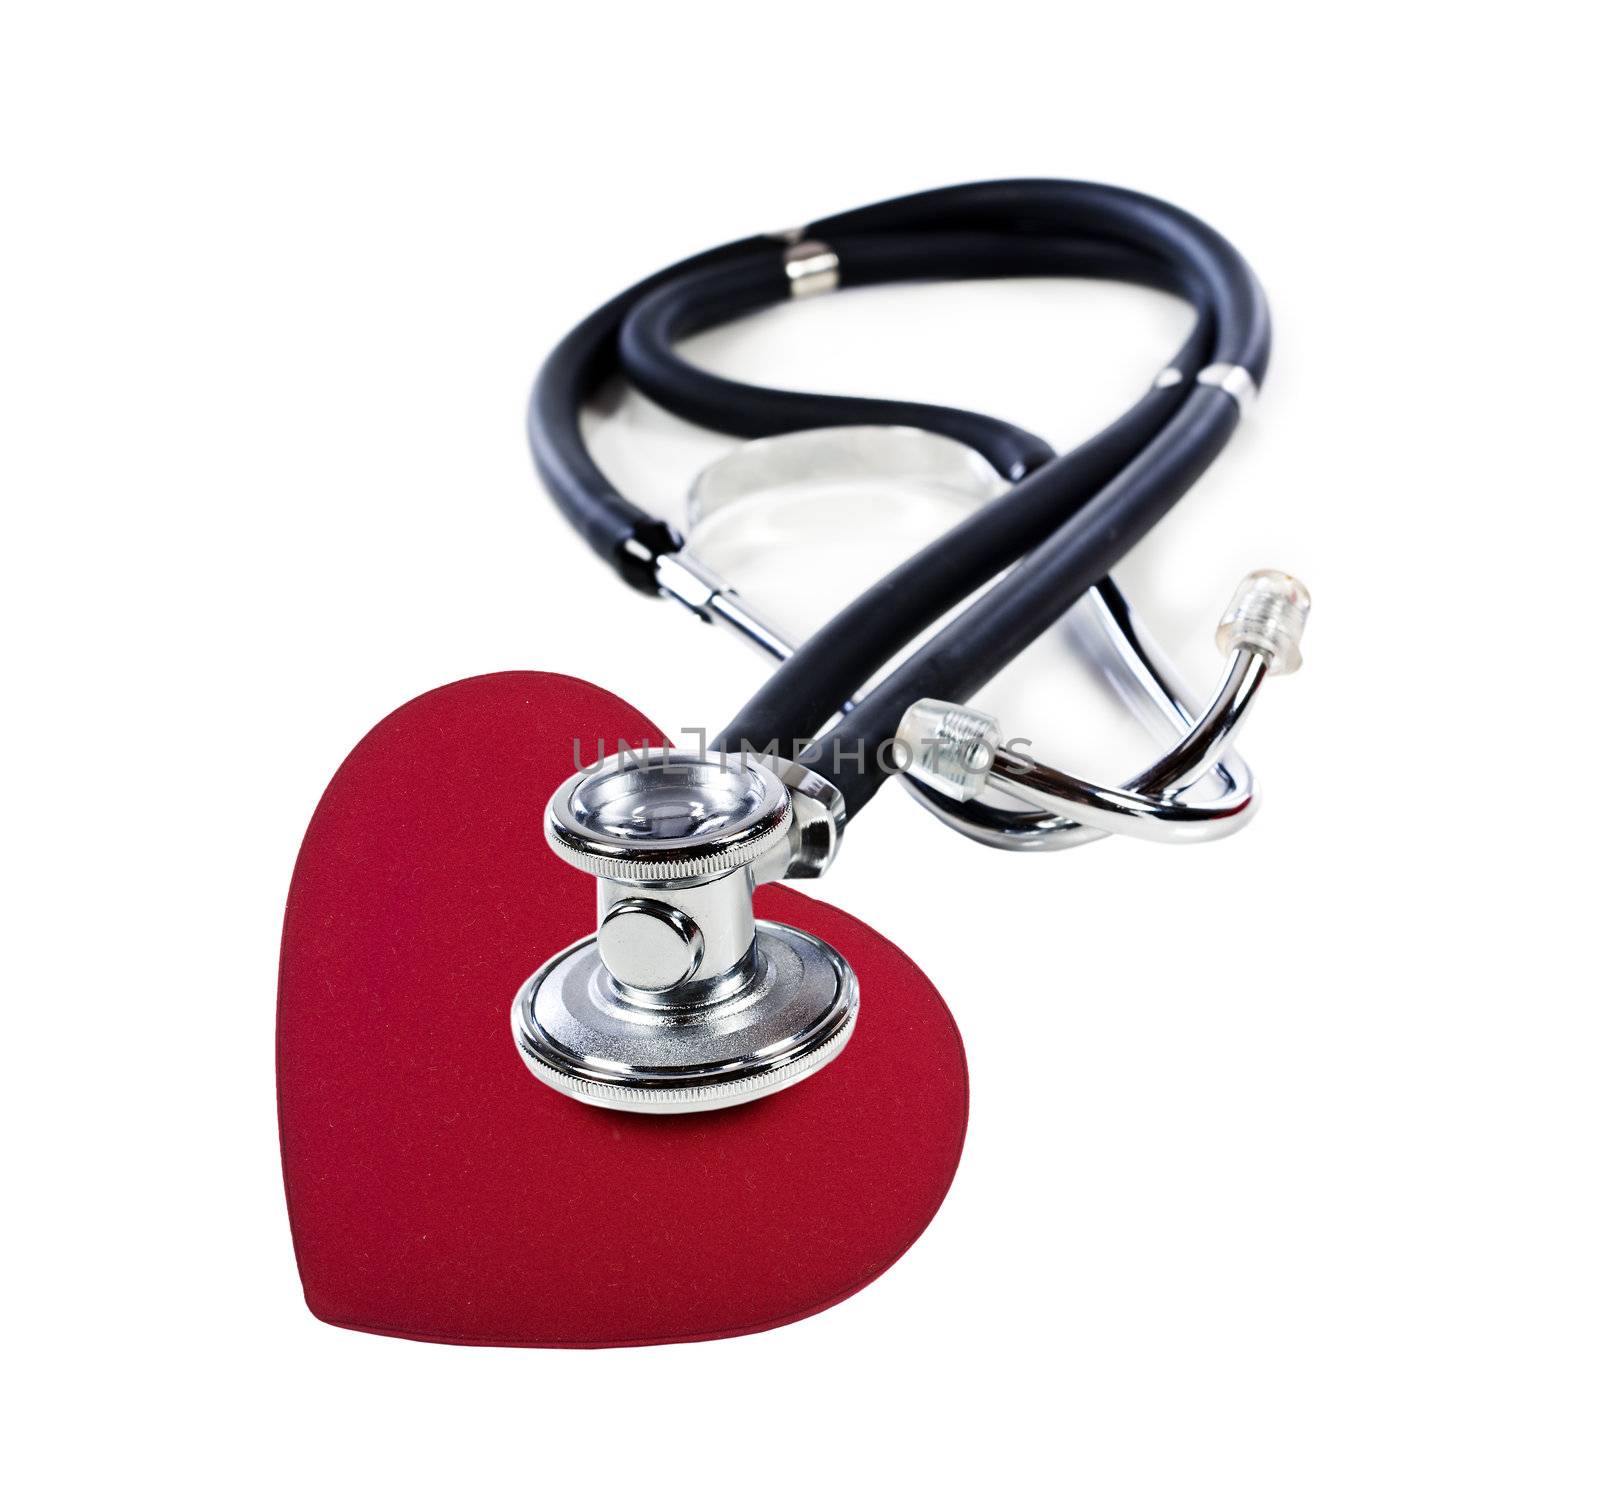 a Doctor's stethoscope listening to a red heart  on a white background with space for text